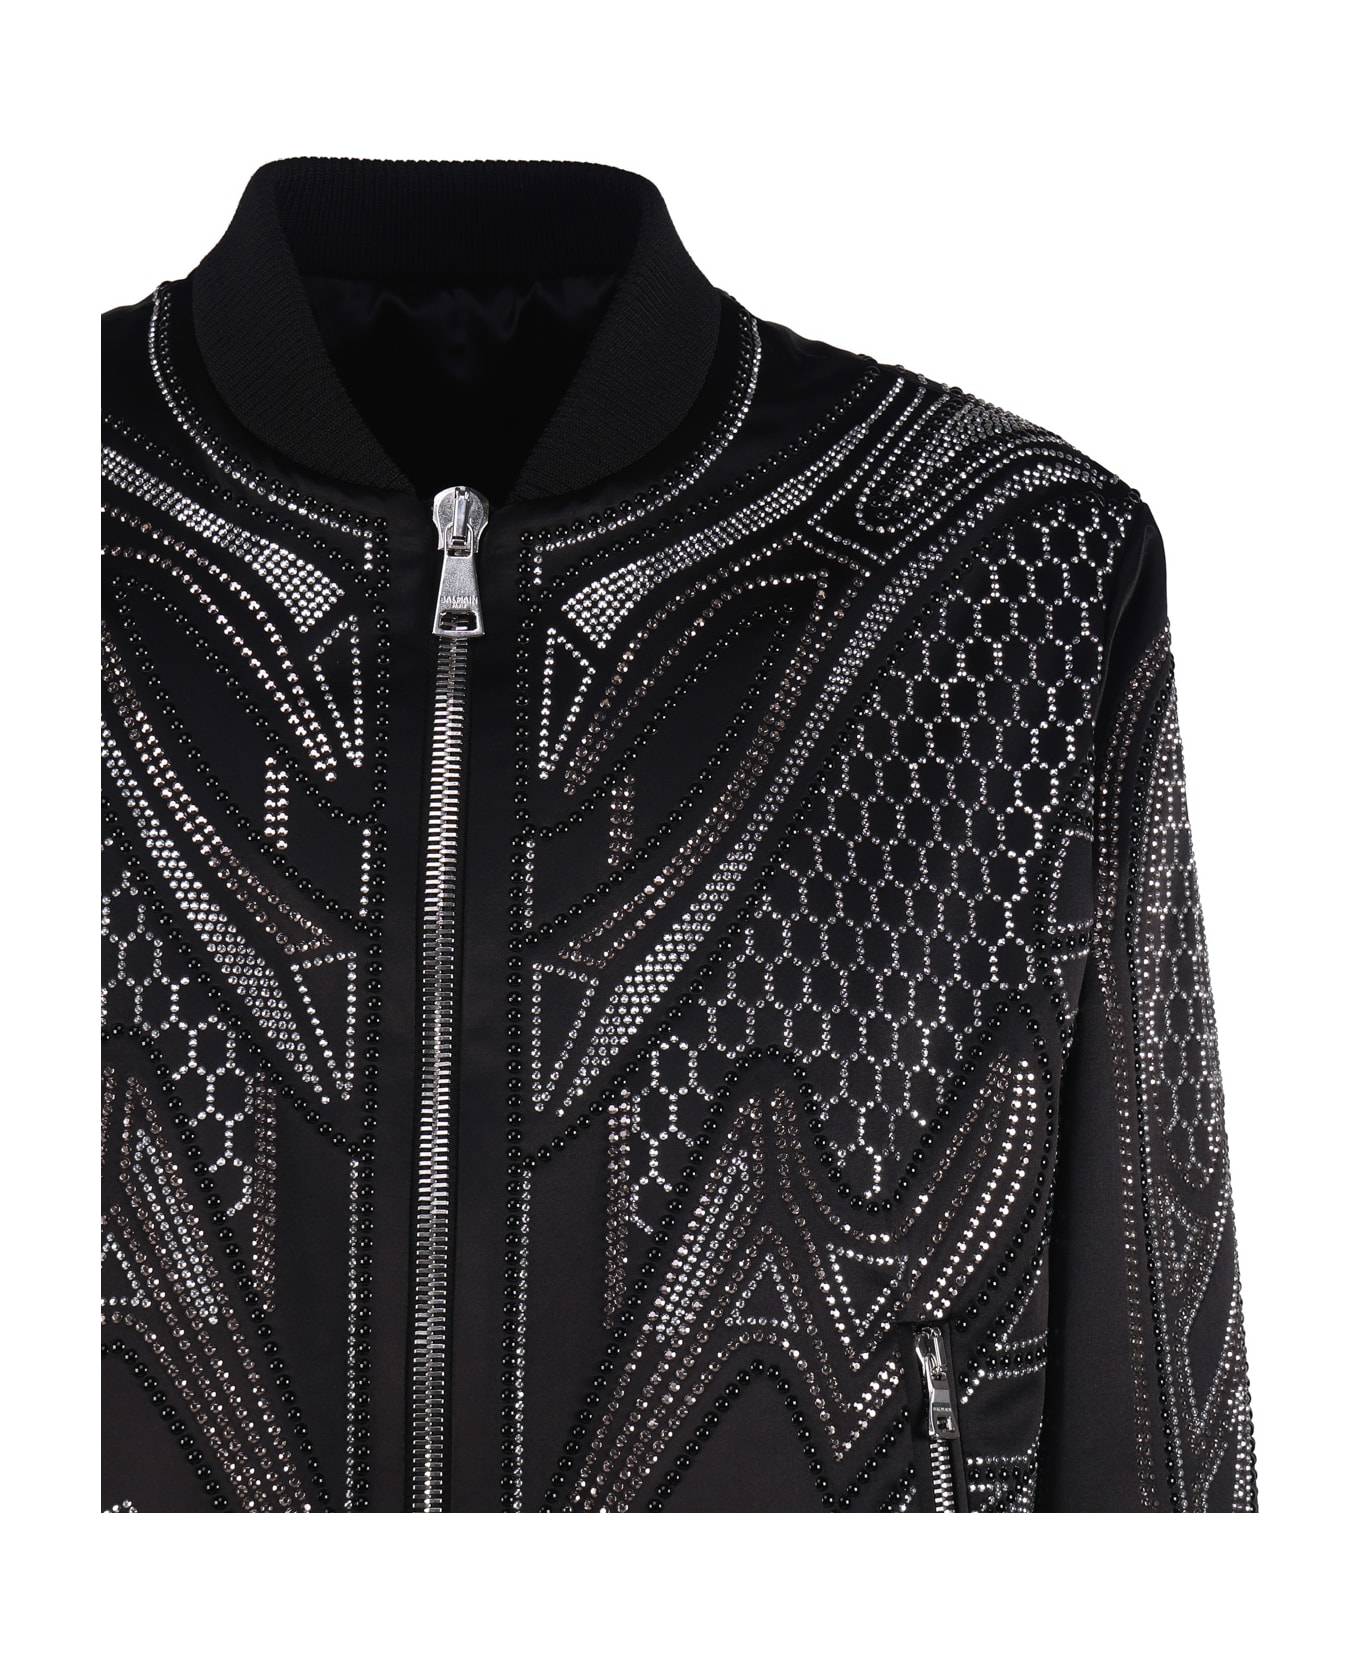 Balmain All-over Embroidered Jacket With Studs - Black ジャケット